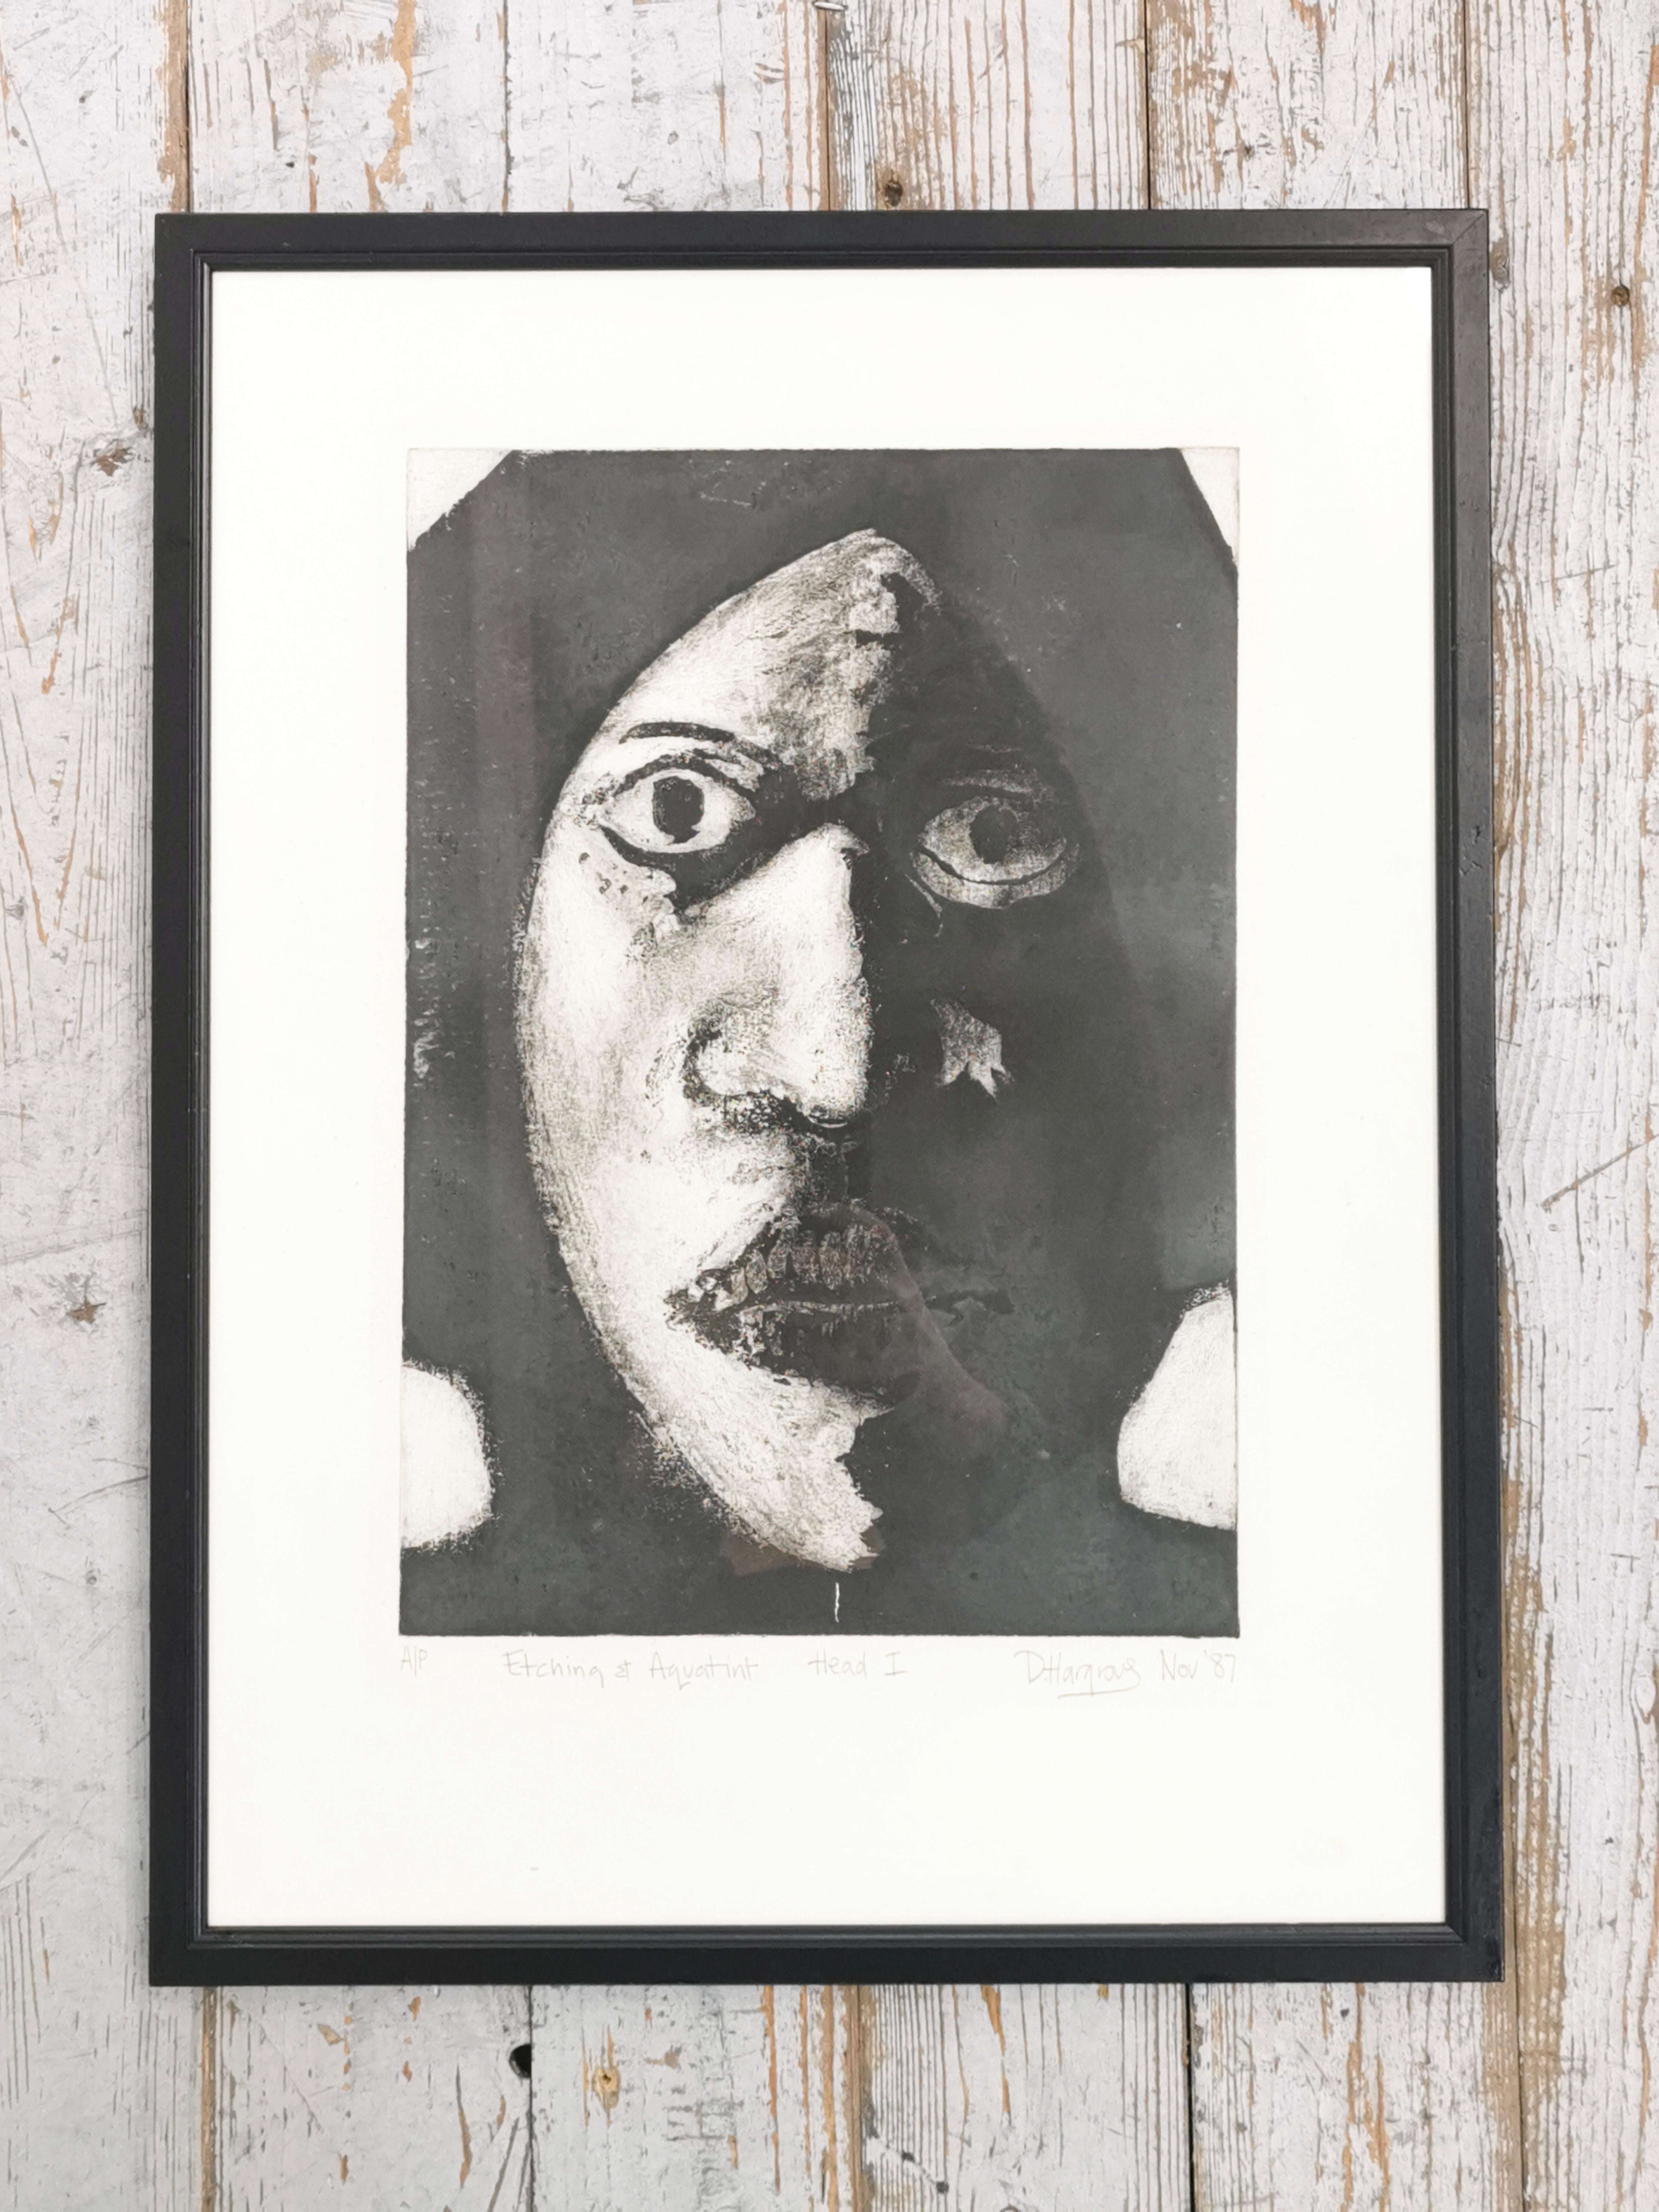 Etching and Aquatint Portrait

Etching and Aquatint monochrome head framed picture from the late 1980s.

The work is signed and dated by the artist.

Very good vintage condition.